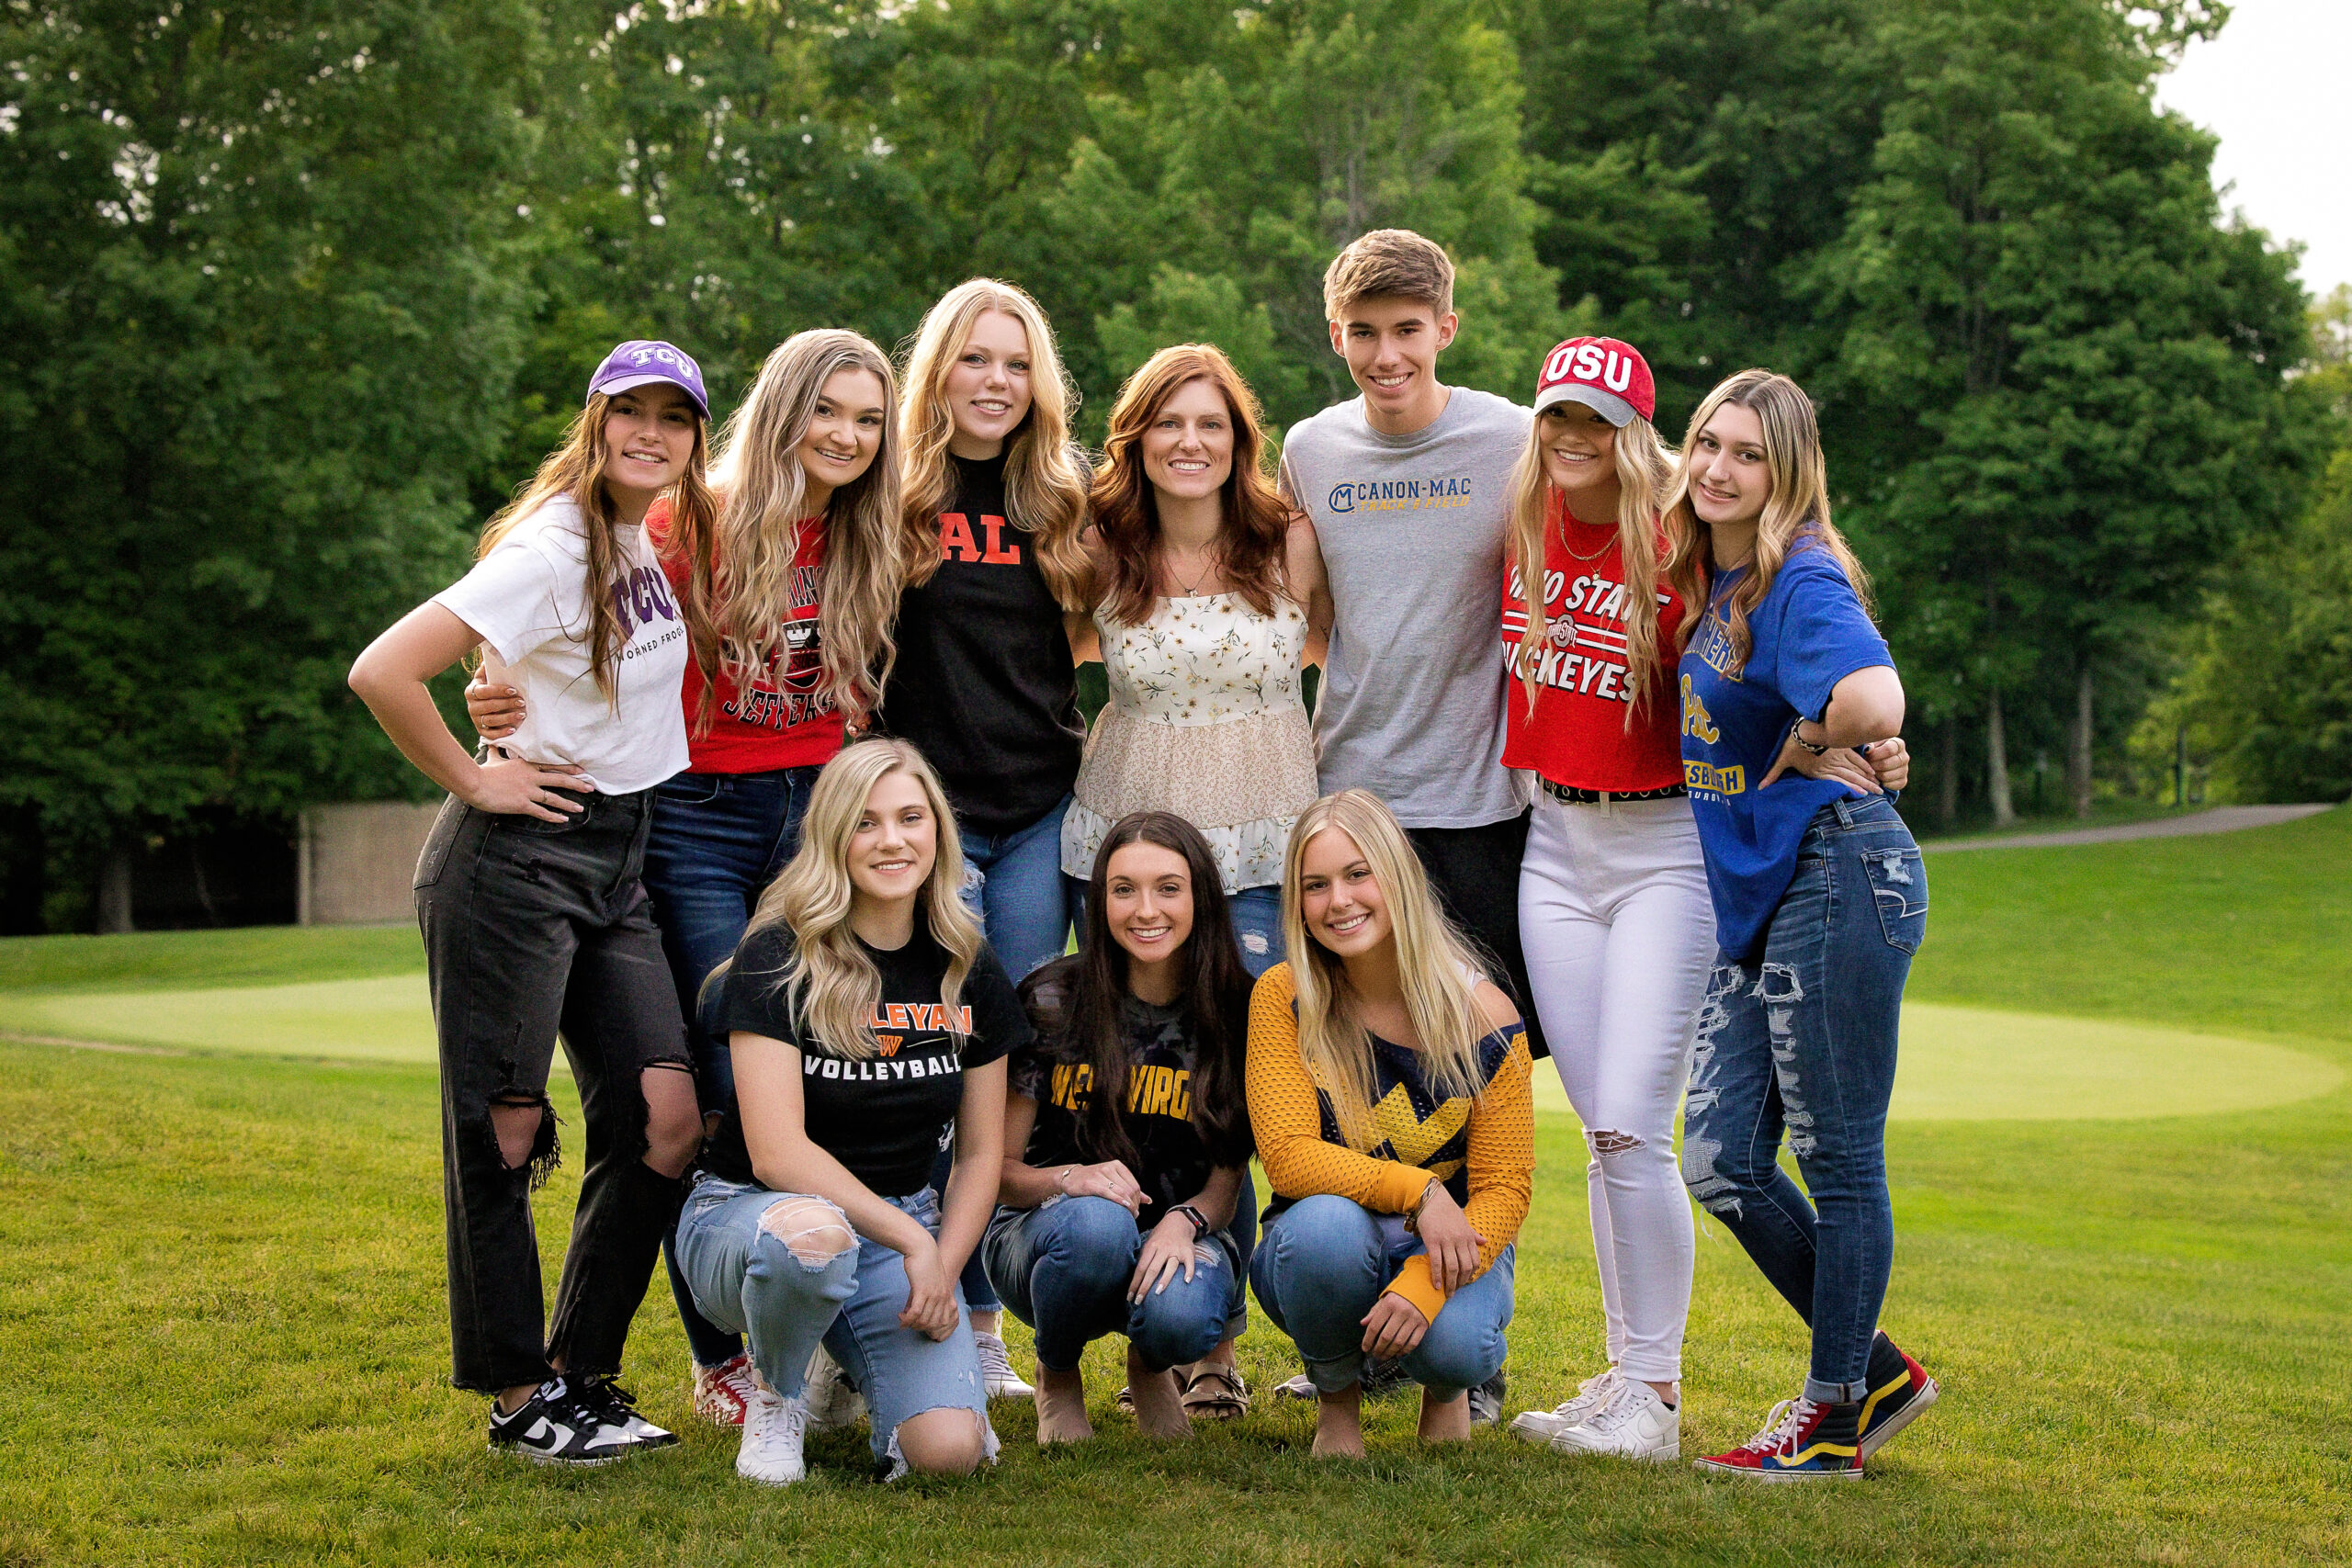 Fotofixation-Photography-Pittsburgh_team pics-Cap & Gown-3790